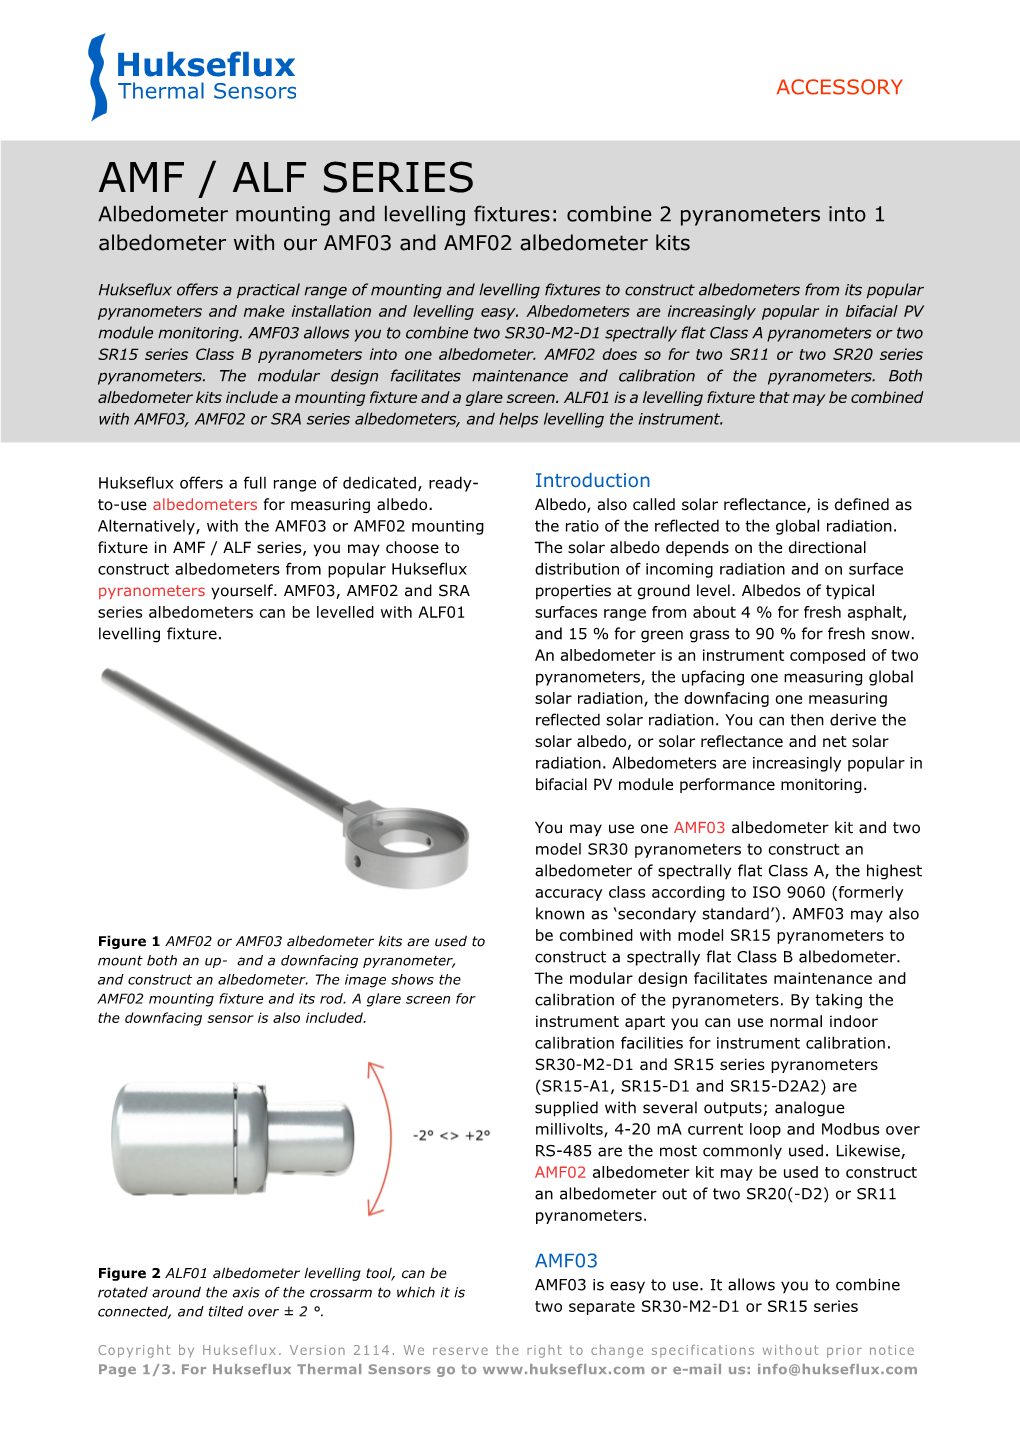 AMF / ALF SERIES Albedometer Mounting and Levelling Fixtures: Combine 2 Pyranometers Into 1 Albedometer with Our AMF03 and AMF02 Albedometer Kits